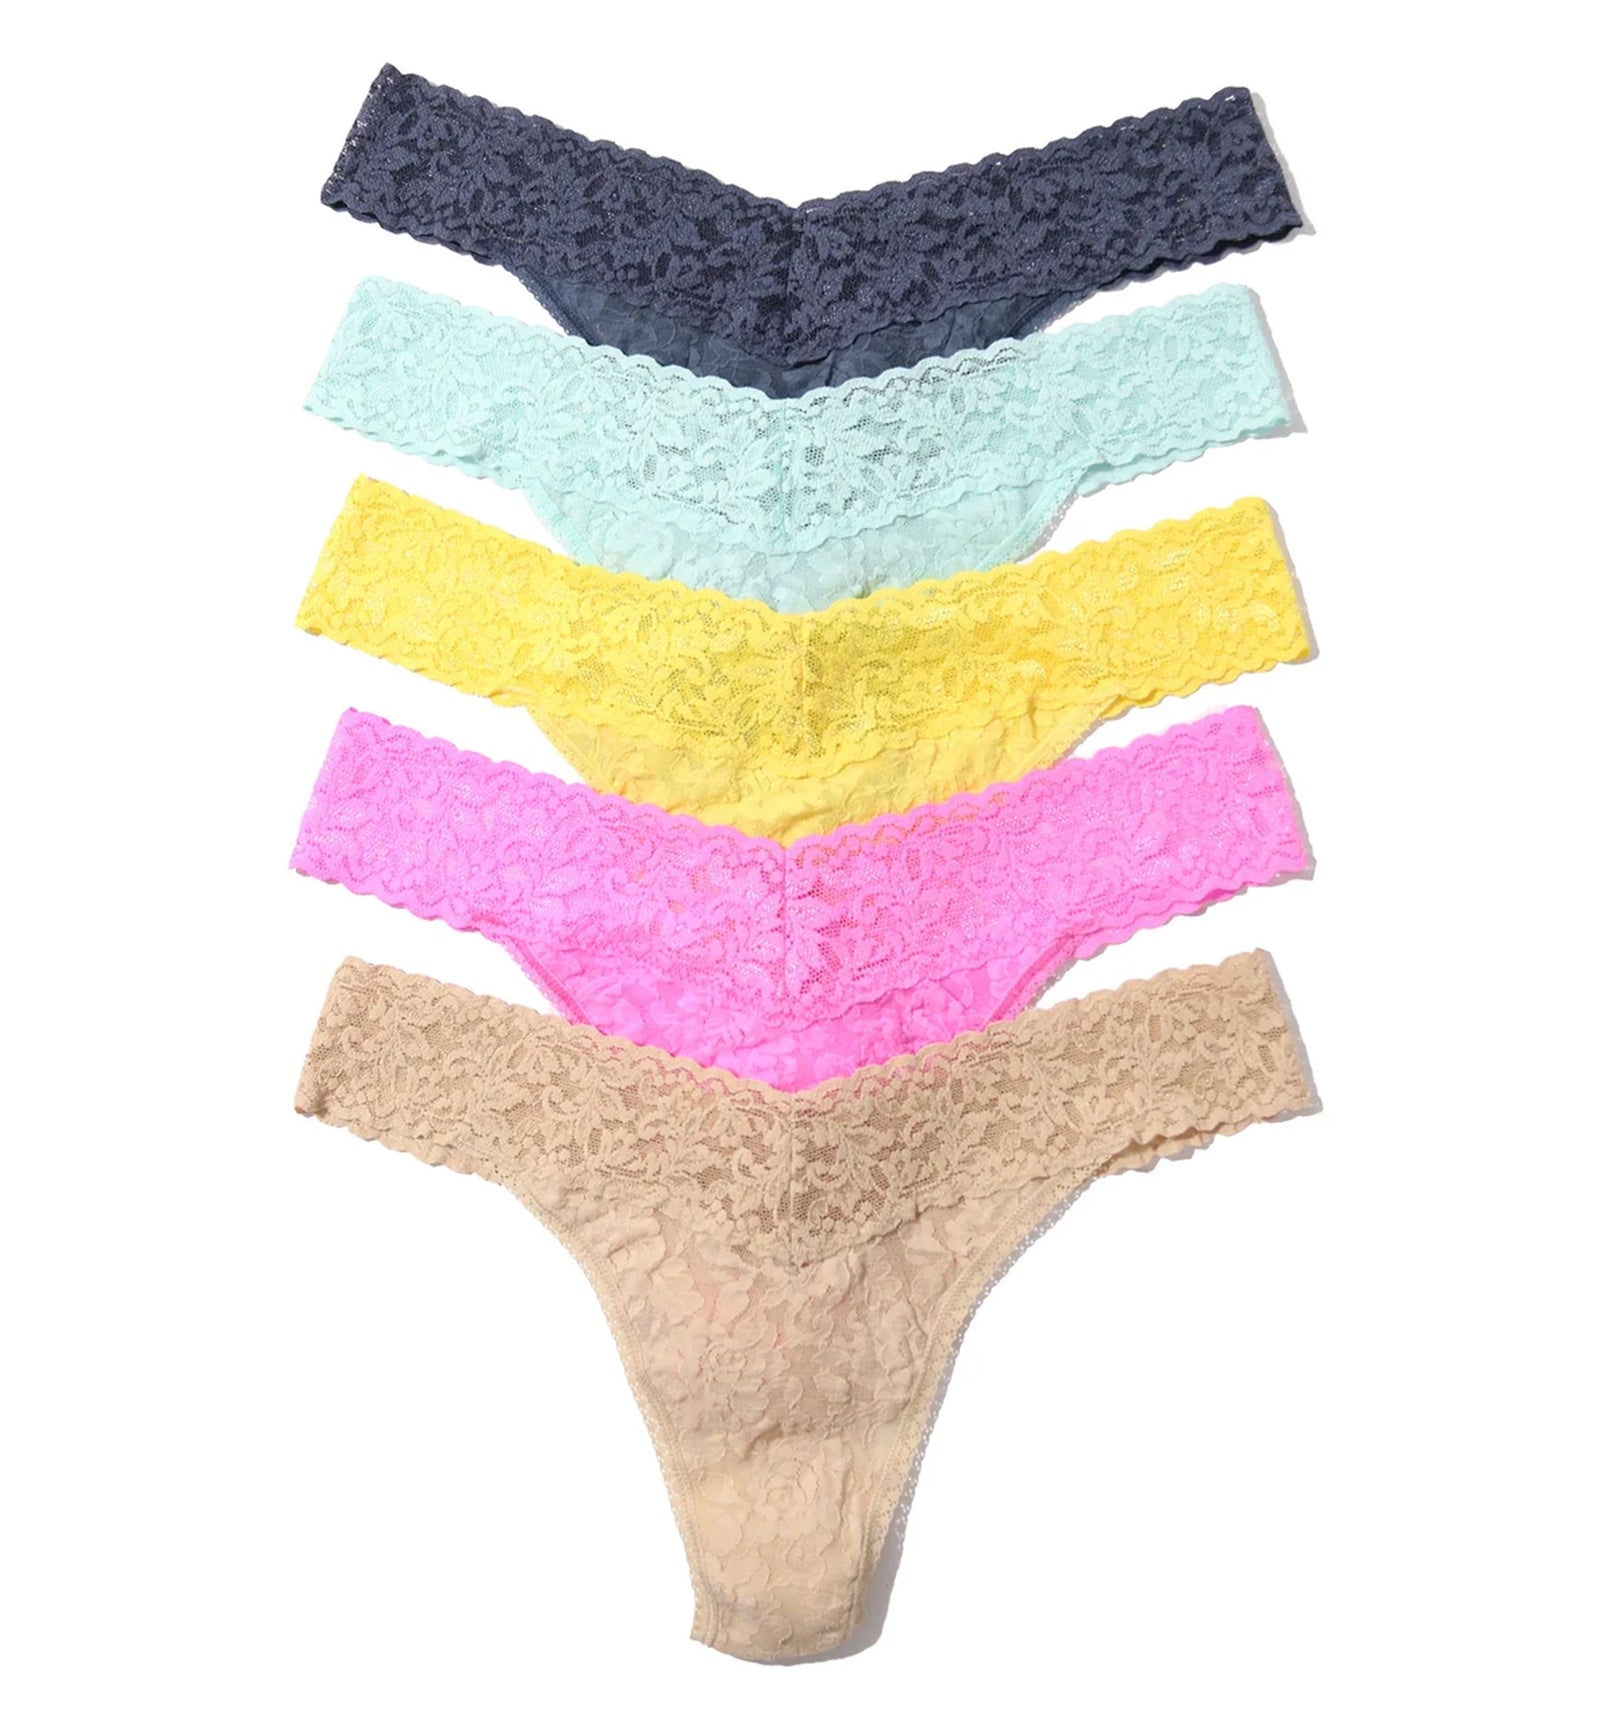 Hanky Panky 5-PACK Signature Lace Original Rise Thong (48115PK),Cannes You Believe It - Cannes You Believe It,One Size